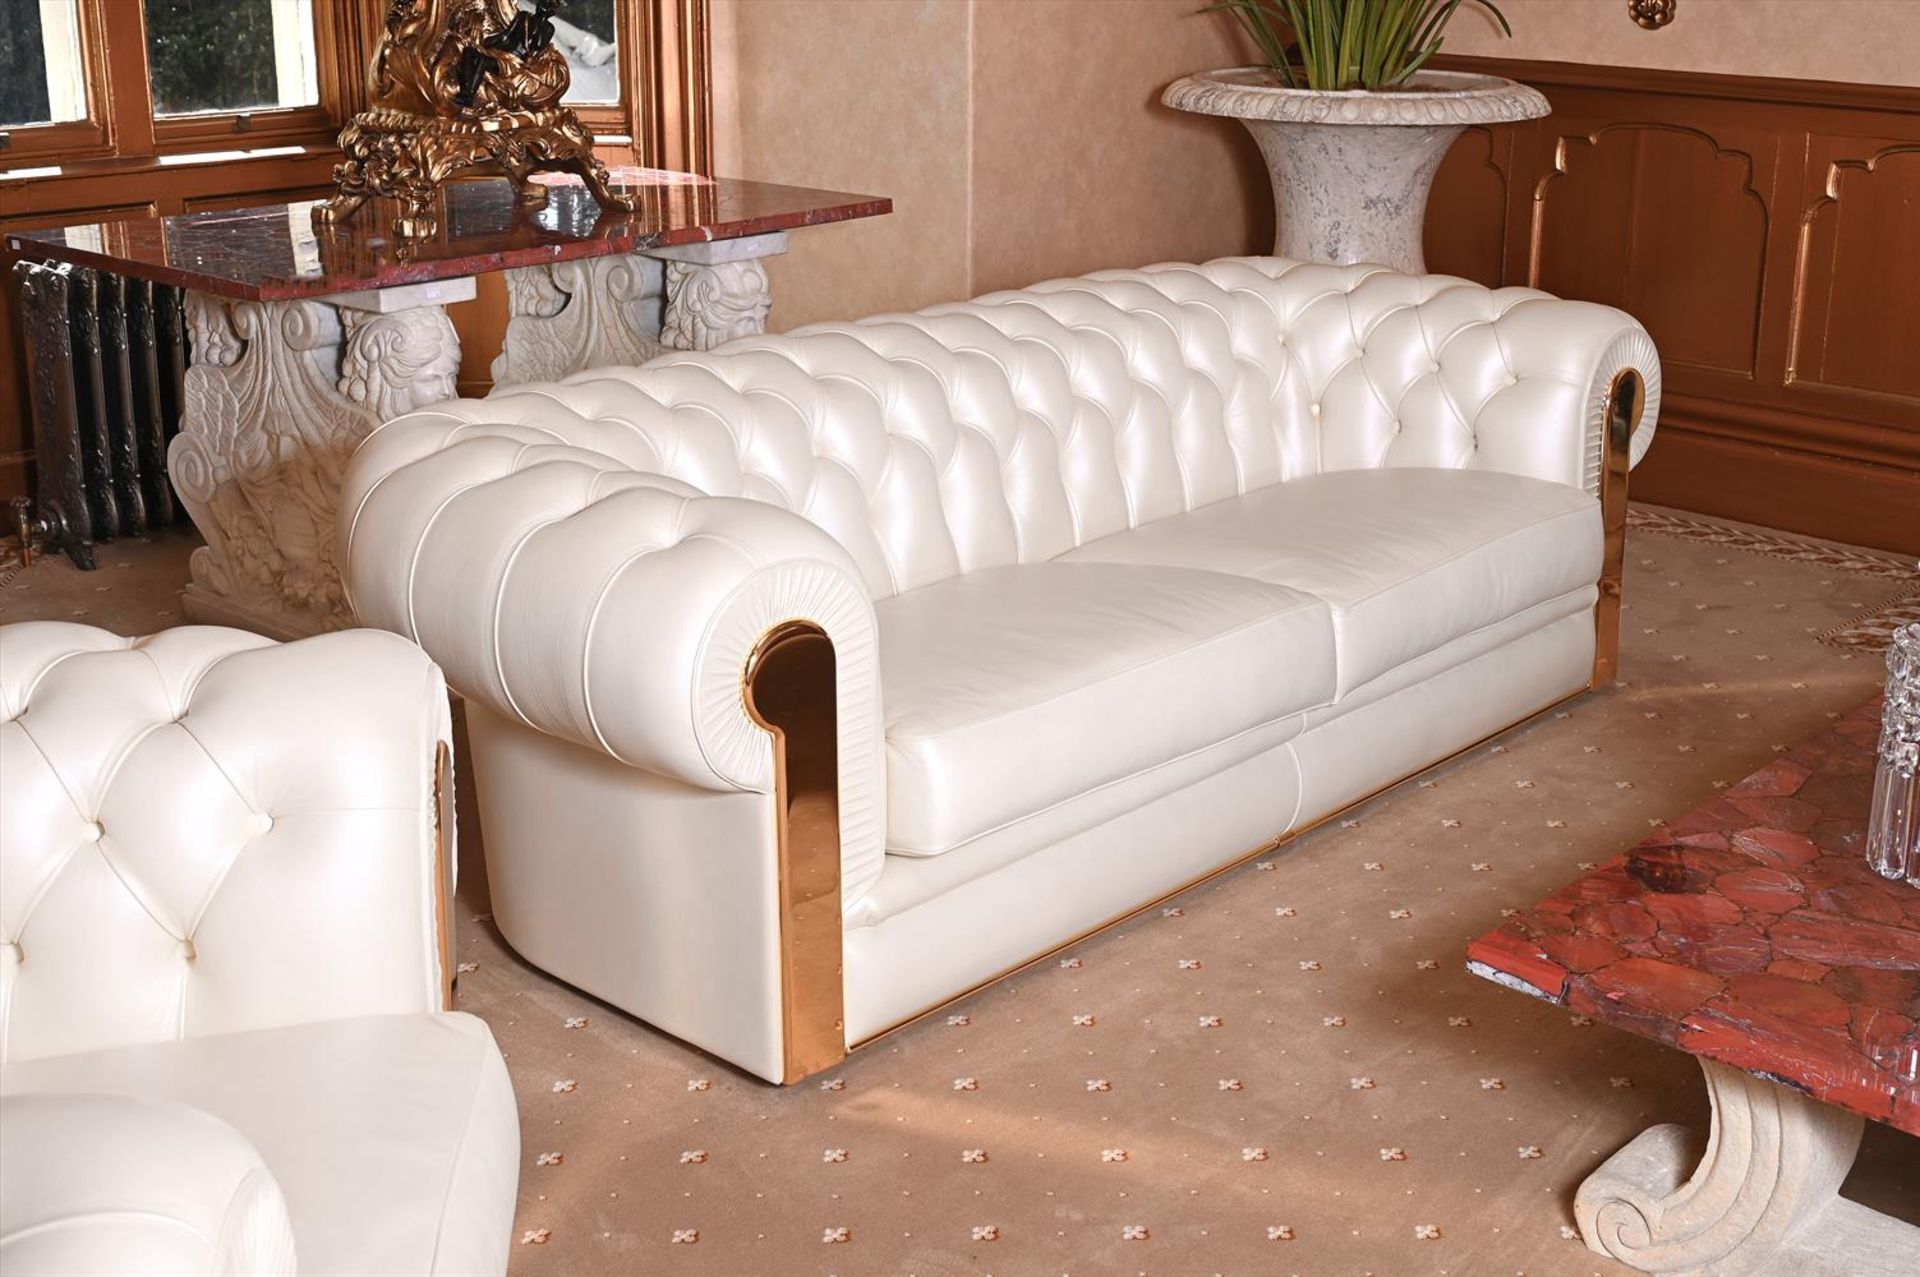 FENDI CASA, ALBIONE, A WHITE LEATHER UPHOLSTERED SUITE - Image 4 of 4